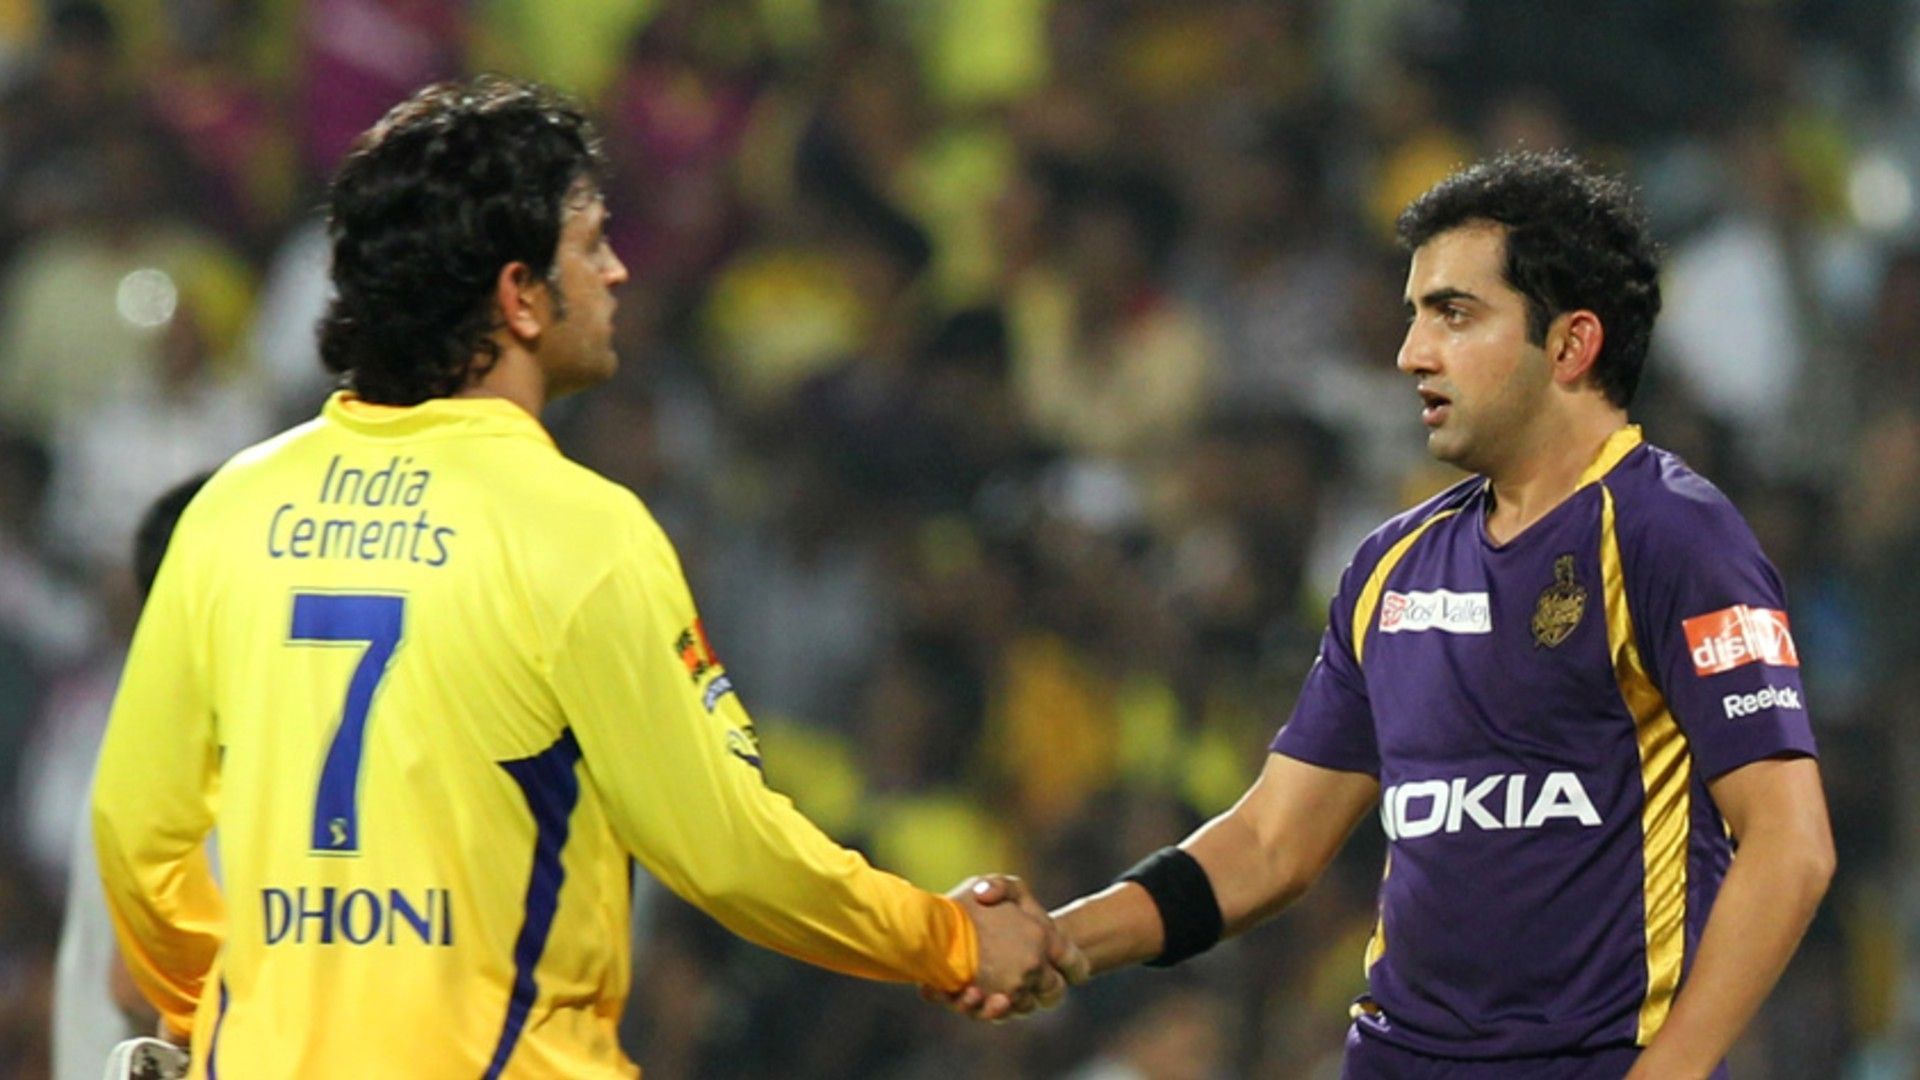 Both Gambhir and Dhoni share mutual respect for each other. Pic: Twitter/@KKRiders